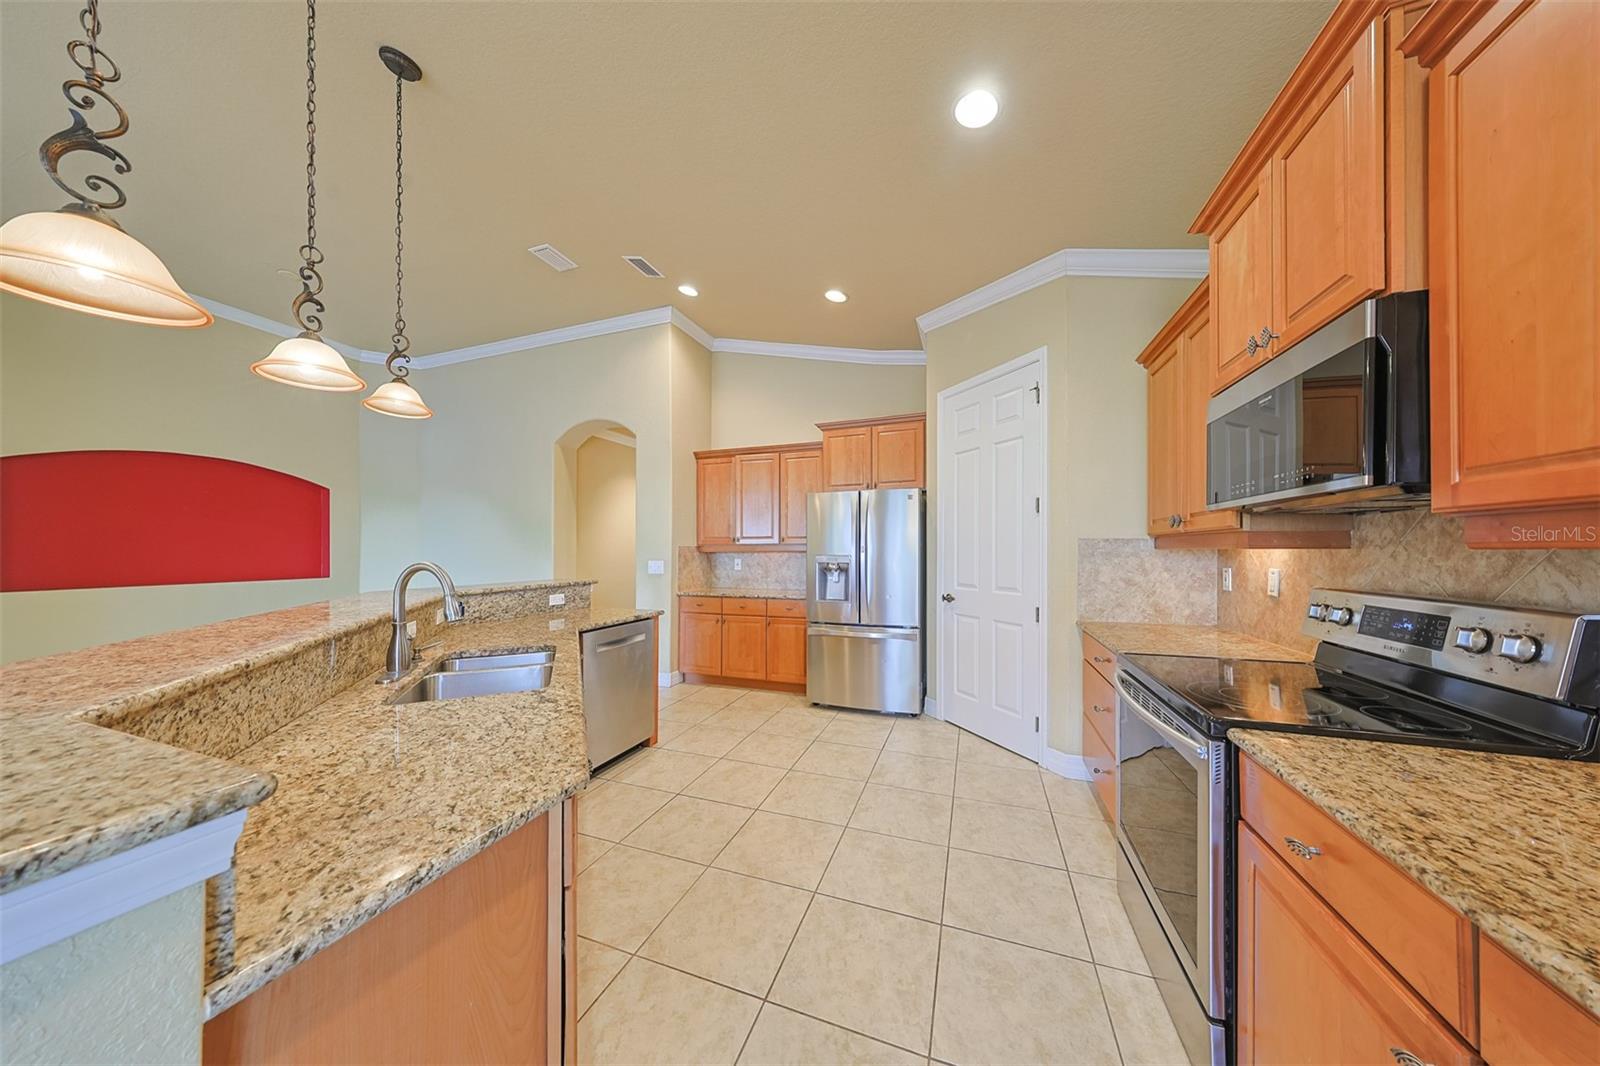 Lots of granite countertops for any task and newer stainless-steel appliances.